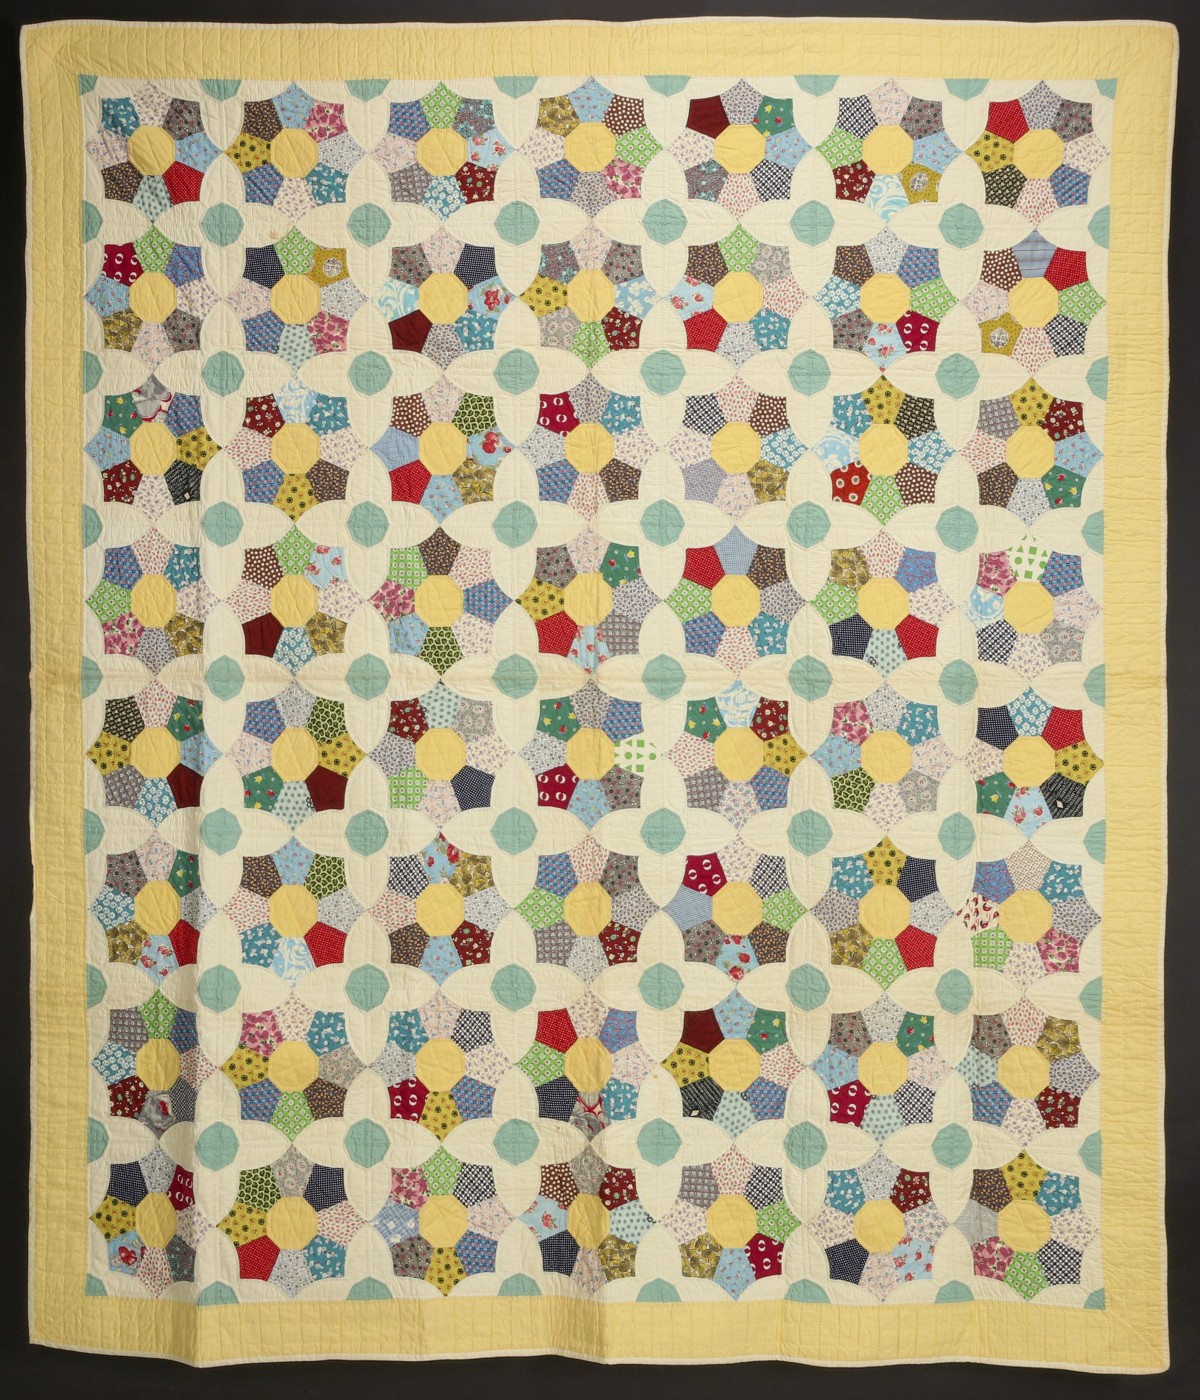 A 1930s FEEDSACK QUILT WITH INTERESTING FAN BLOCKS